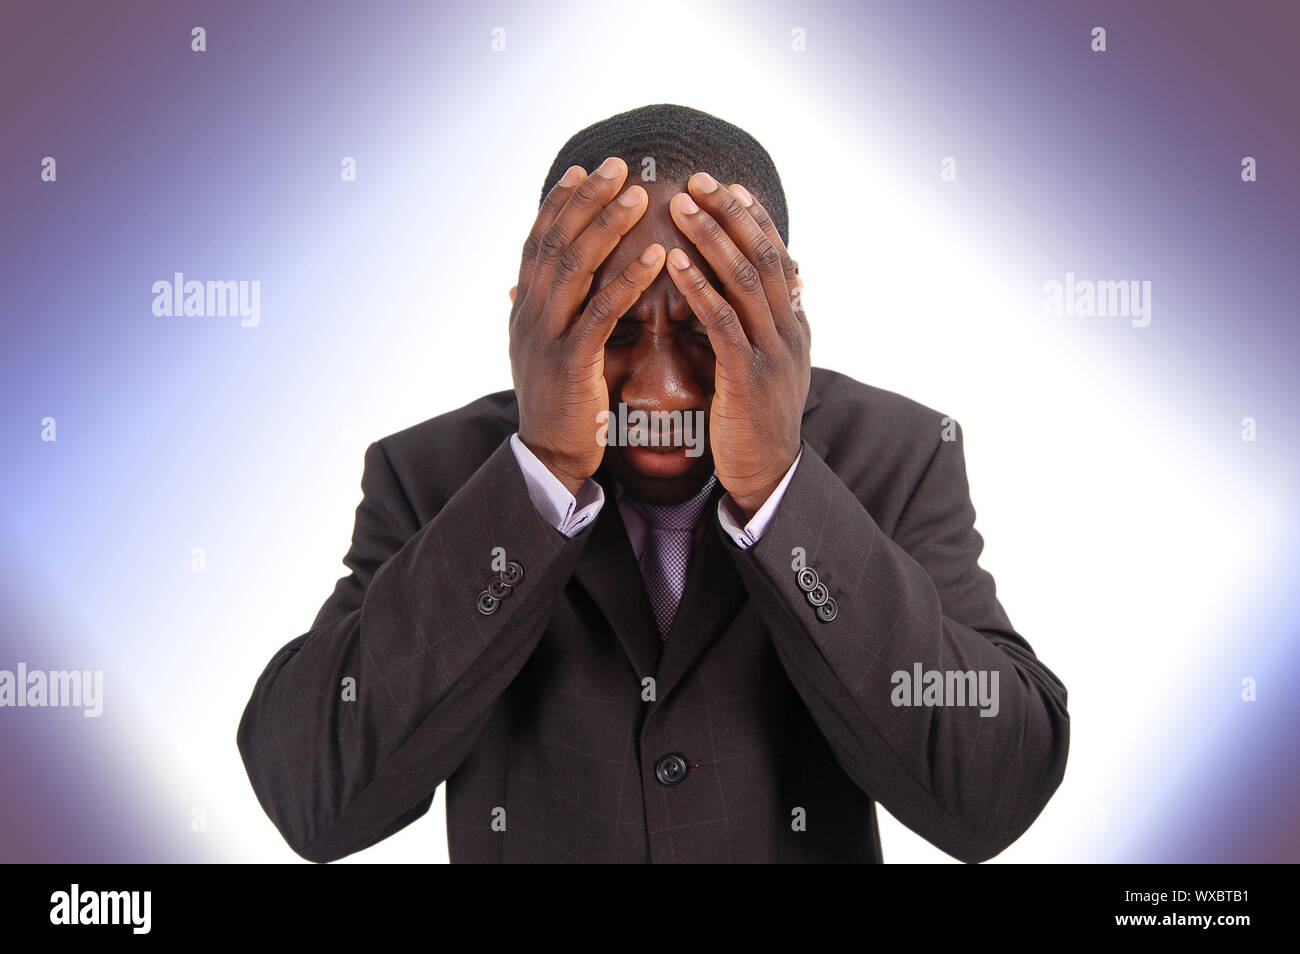 This is an image of a business man with his hands to his head. This image can represent 'Bad news', 'Poor Investment', 'Confusion' etc.. Stock Photo